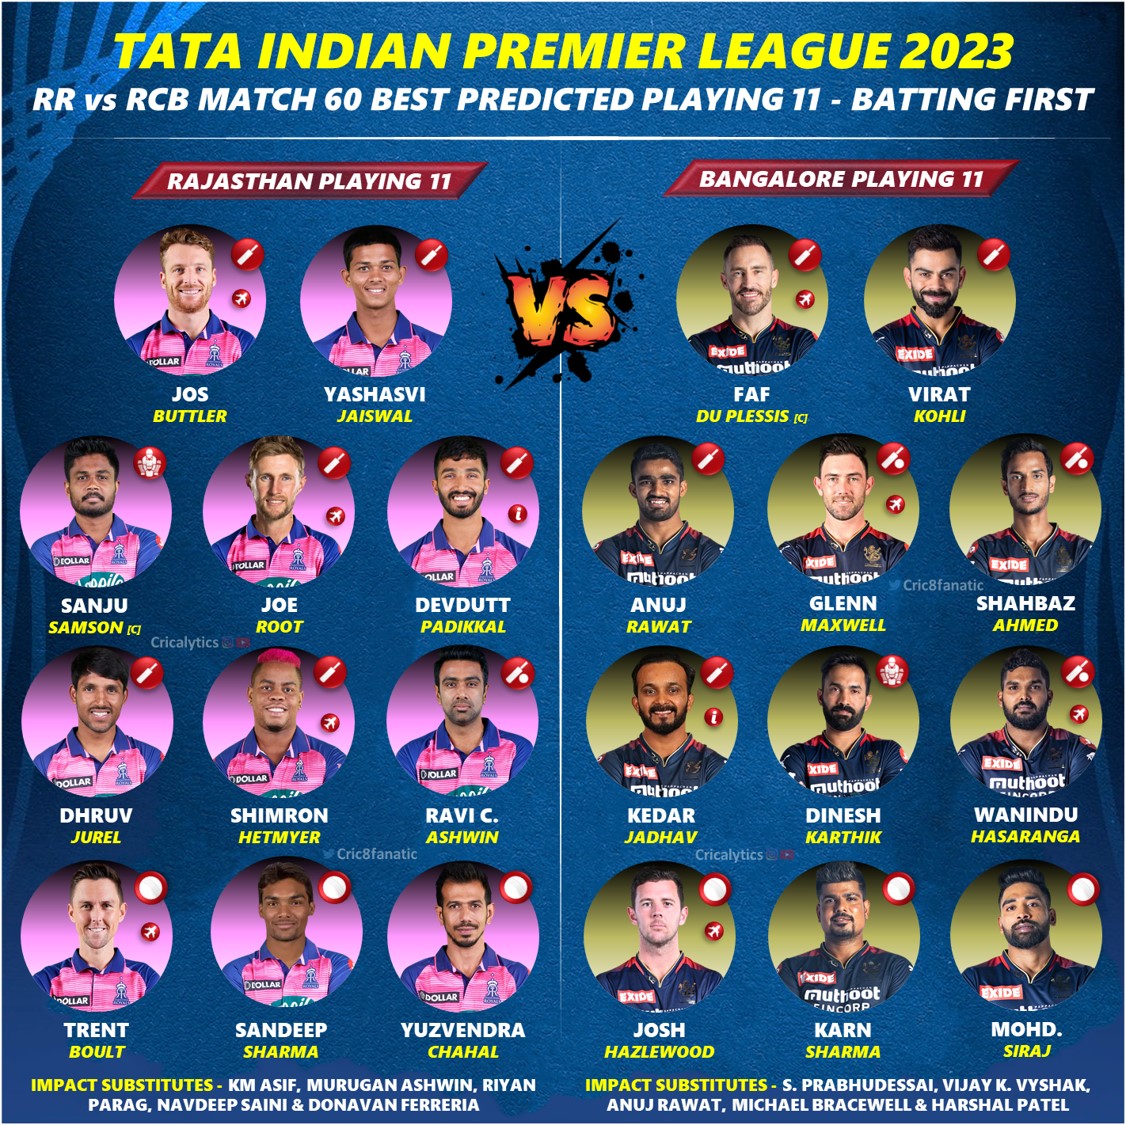 ipl 2023 rr vs rcb match 60 best predicted playing 11 for both teams